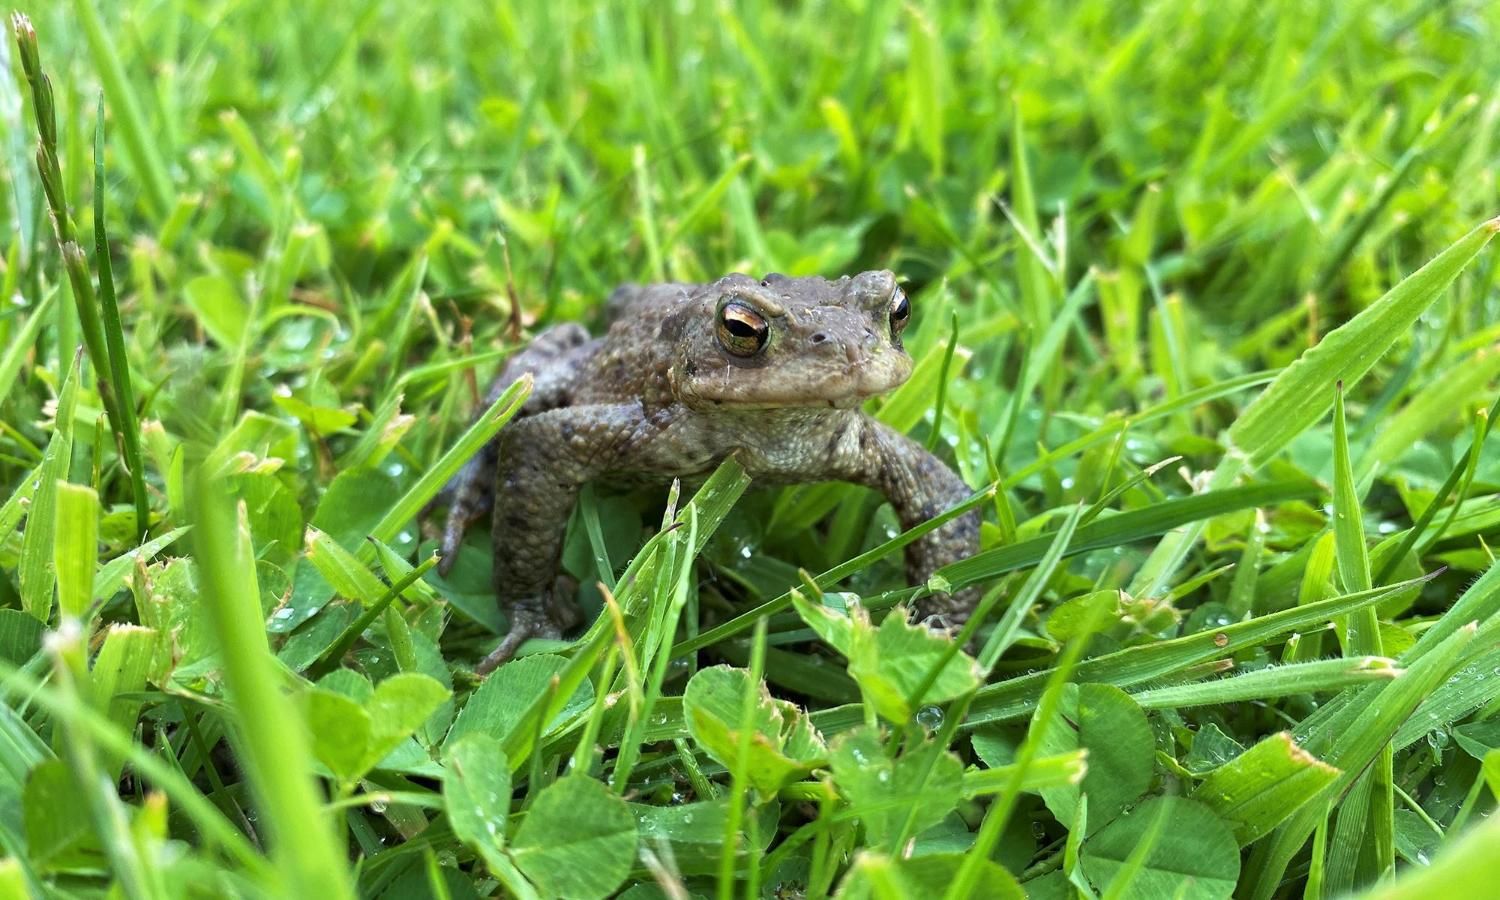 A toad on grass